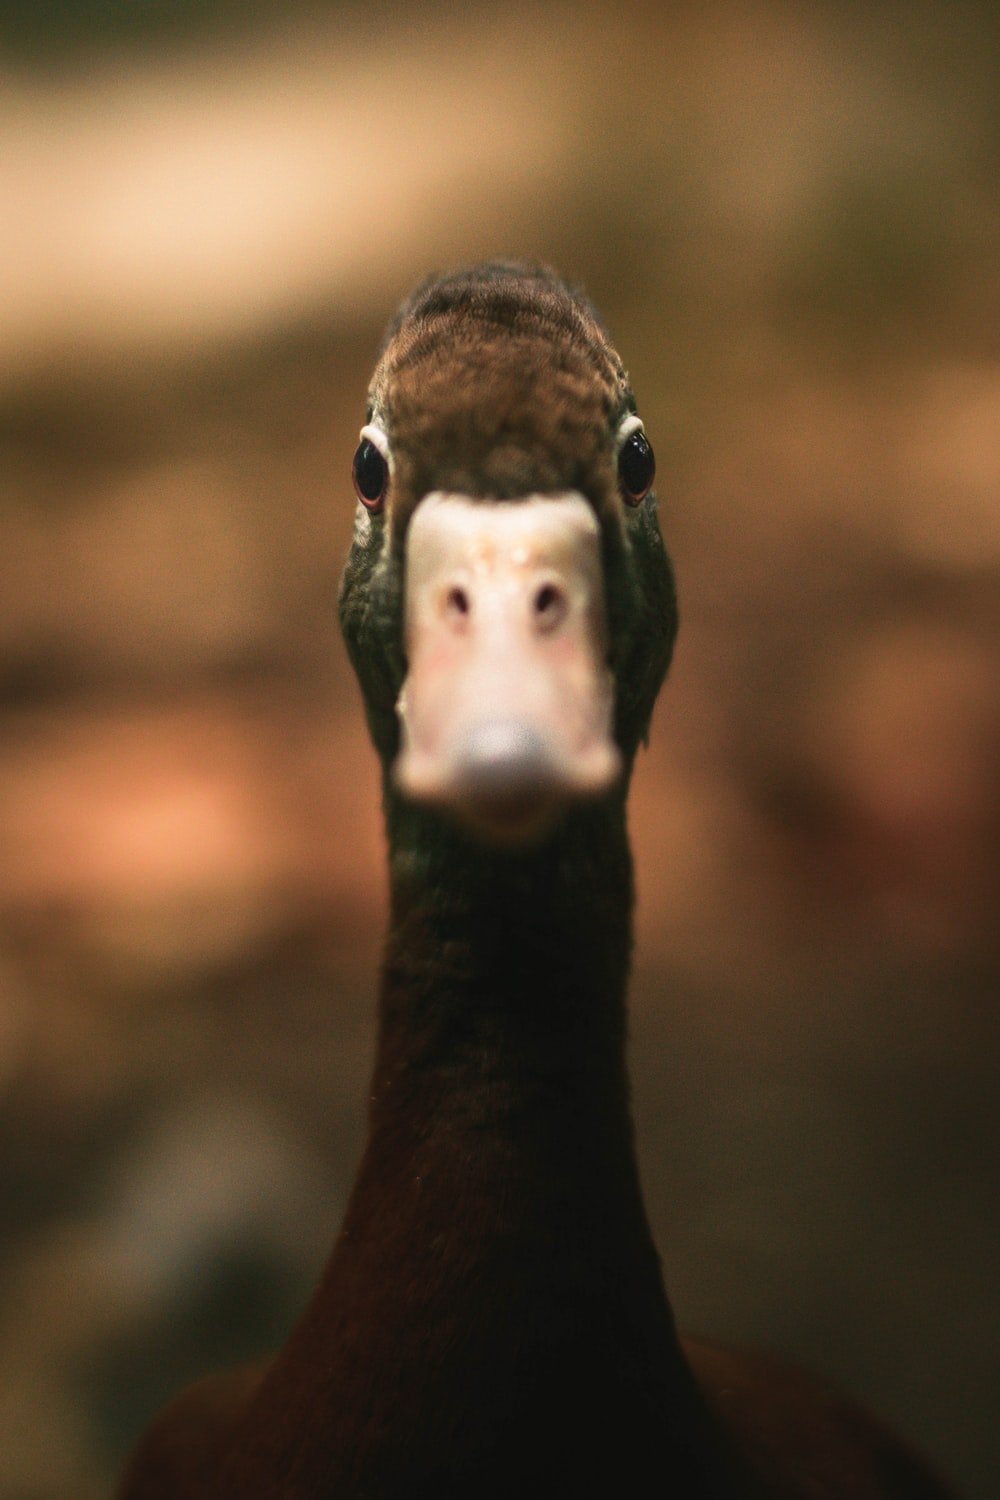 Duck Picture. Download Free Image